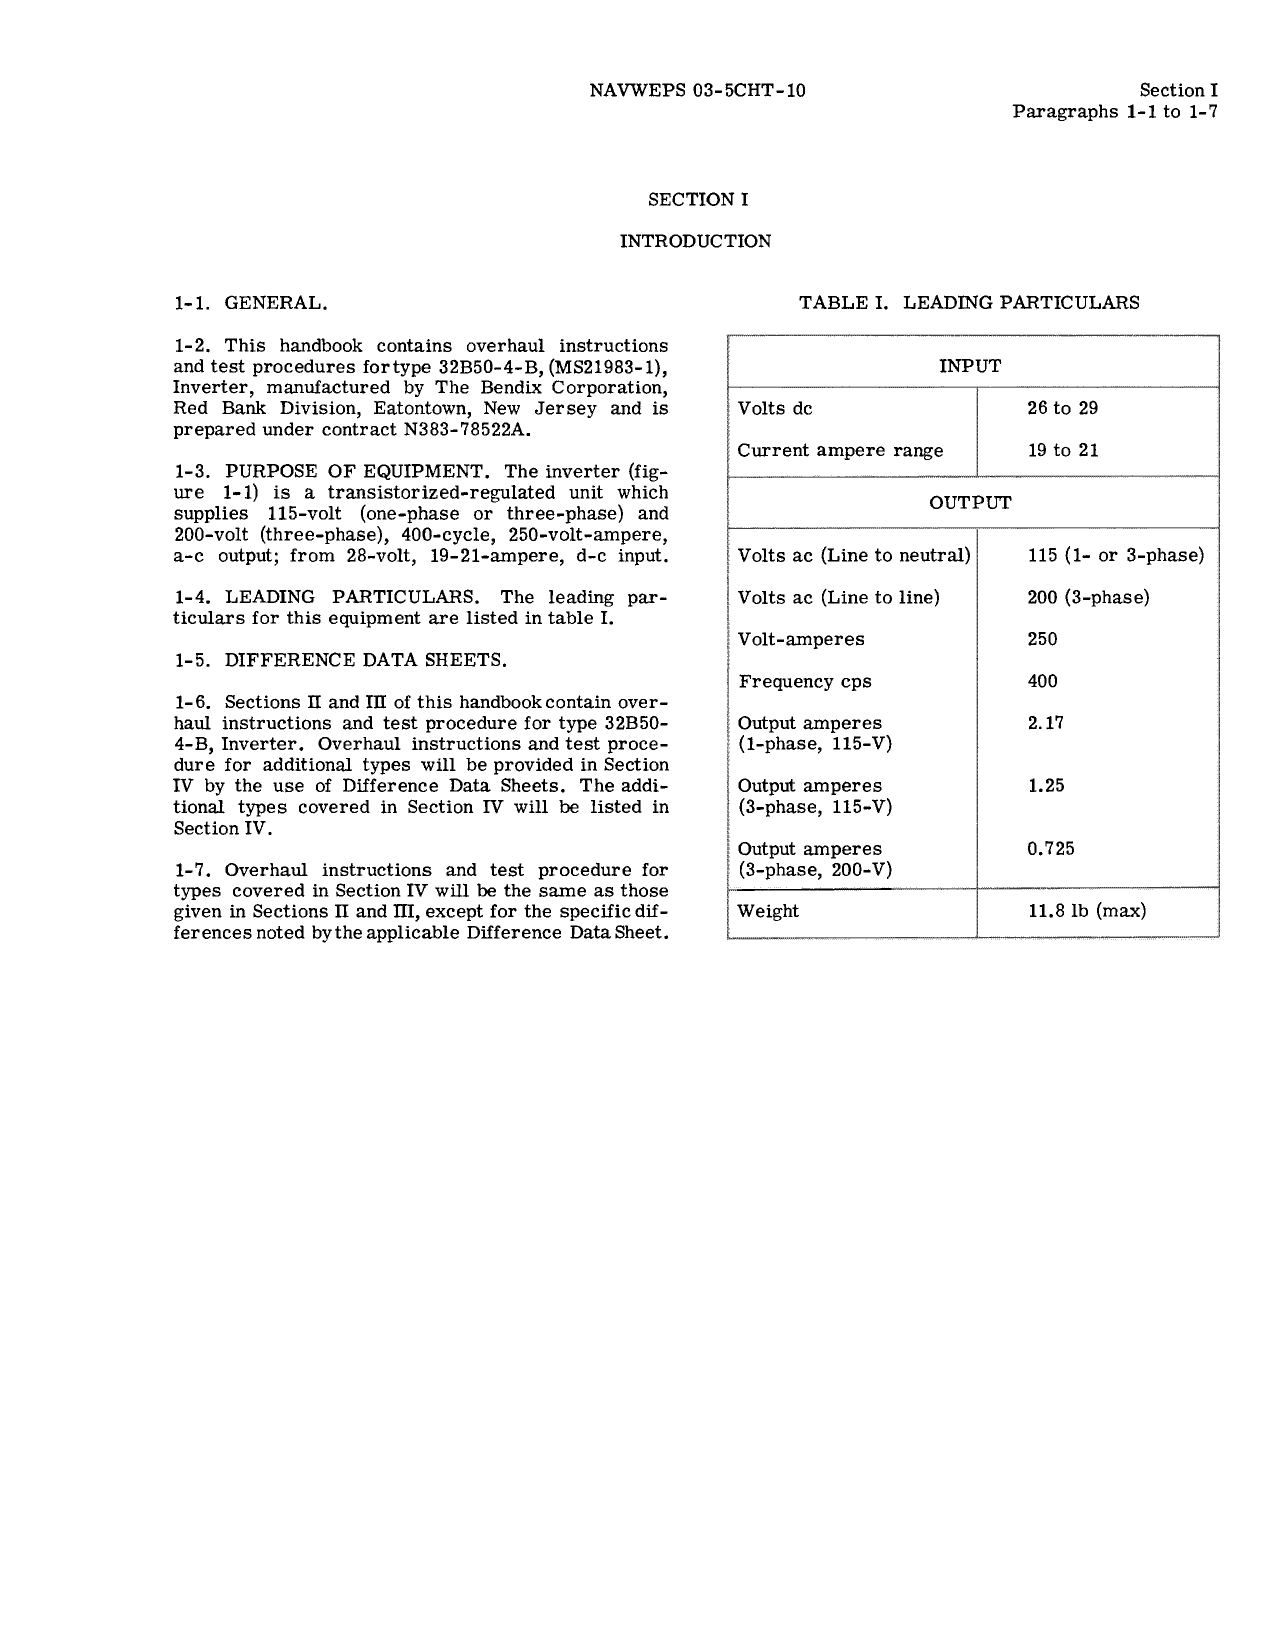 Sample page 5 from AirCorps Library document: Overhaul Instructions for Inverter - Type 32B50-4-B